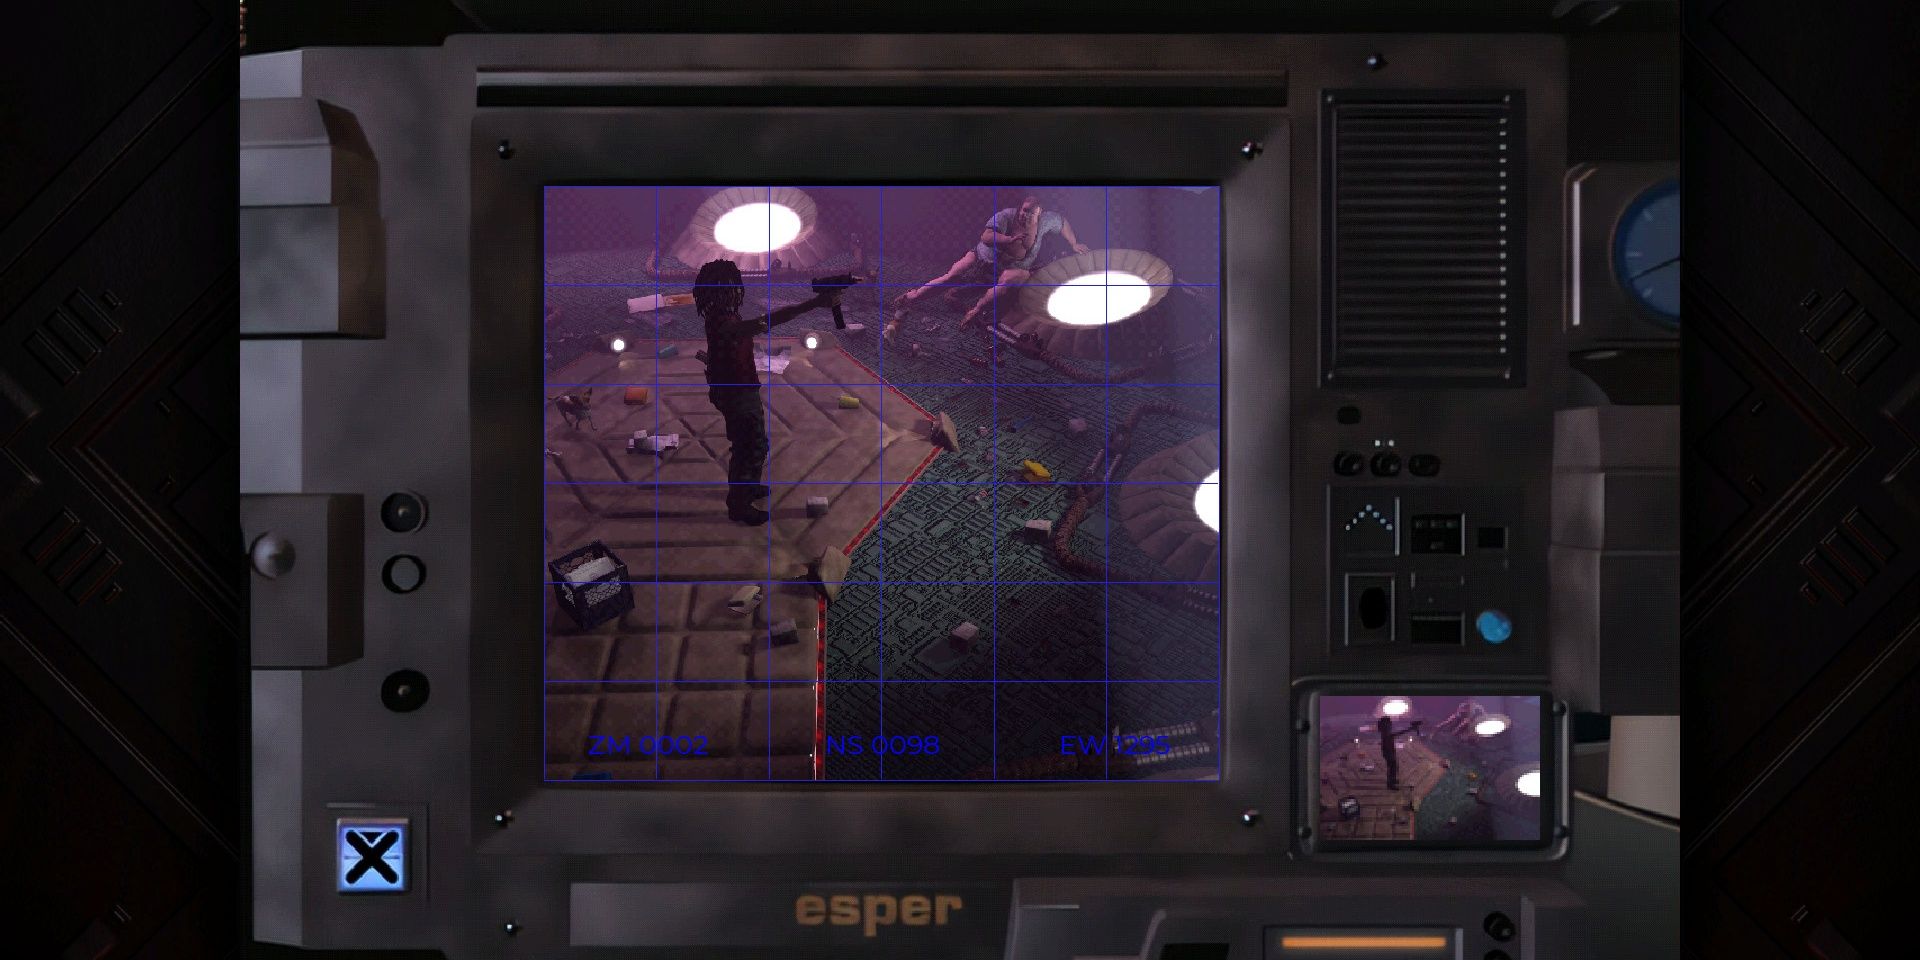 An image of the character holding a rifle inside a monitor in the Blade Runner